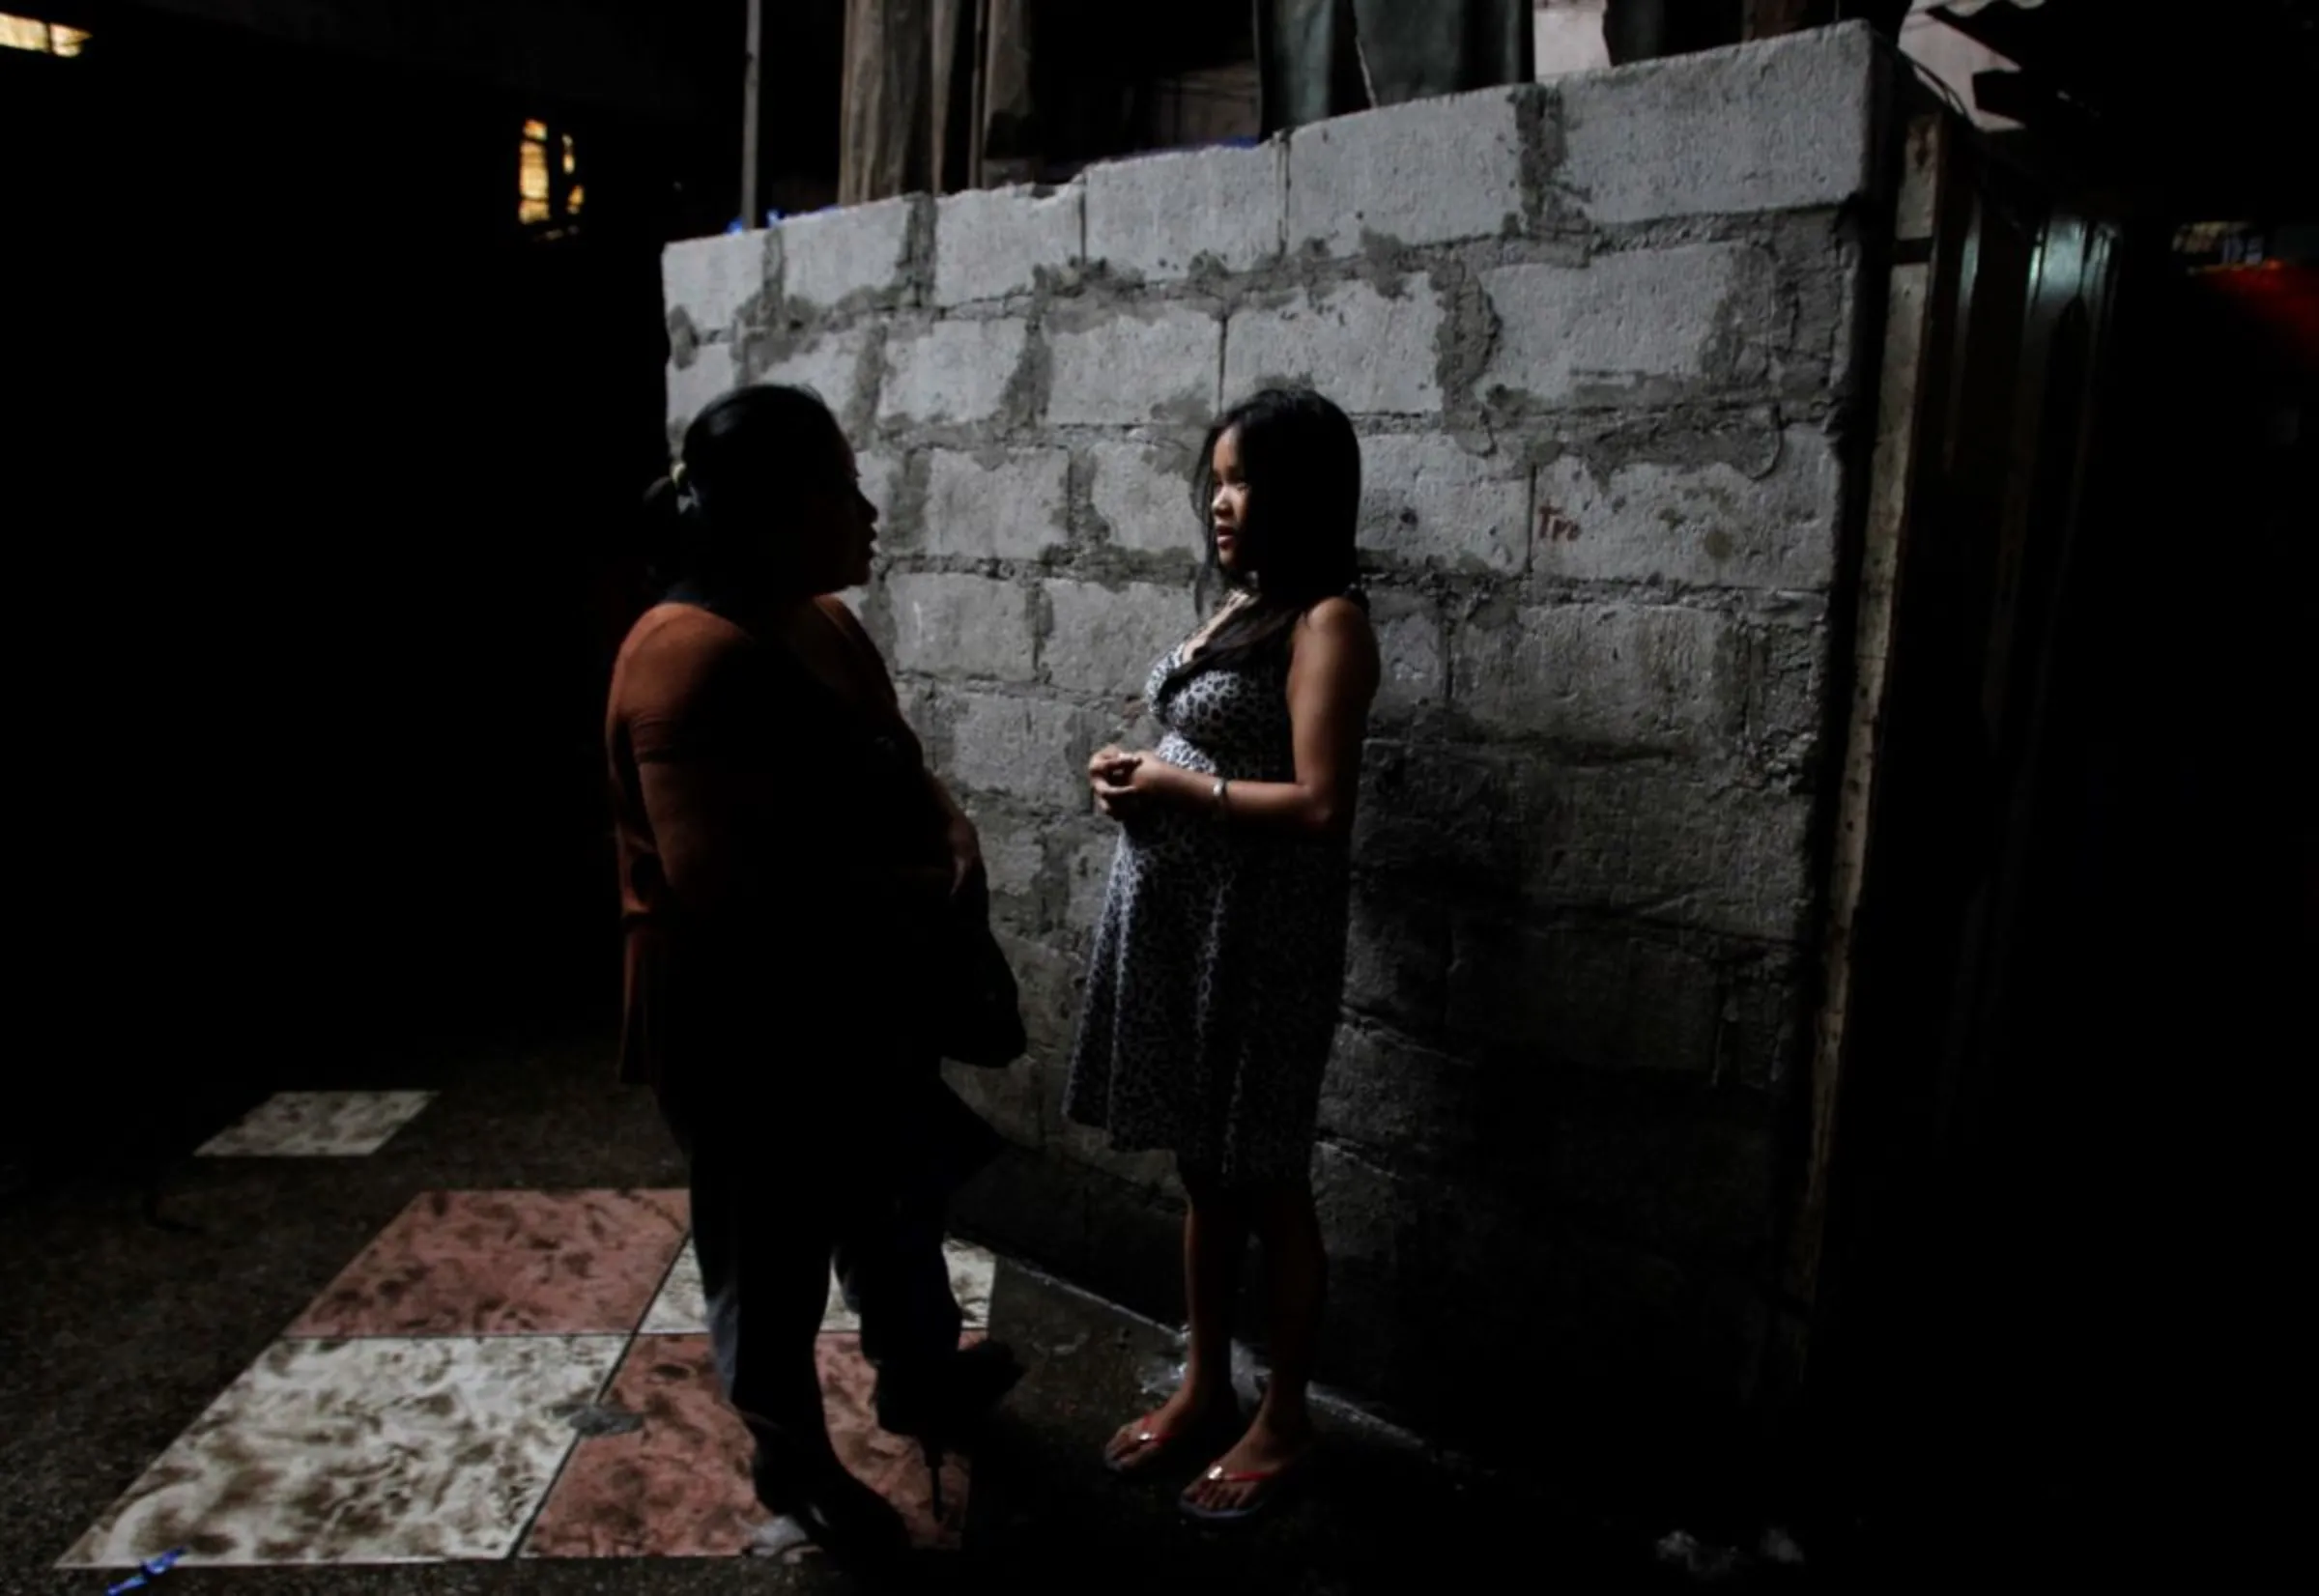 A community social worker talks to a pregnant 16-year-old teenager in Tondo, Manila August 5, 2012. REUTERS/Erik De Castro